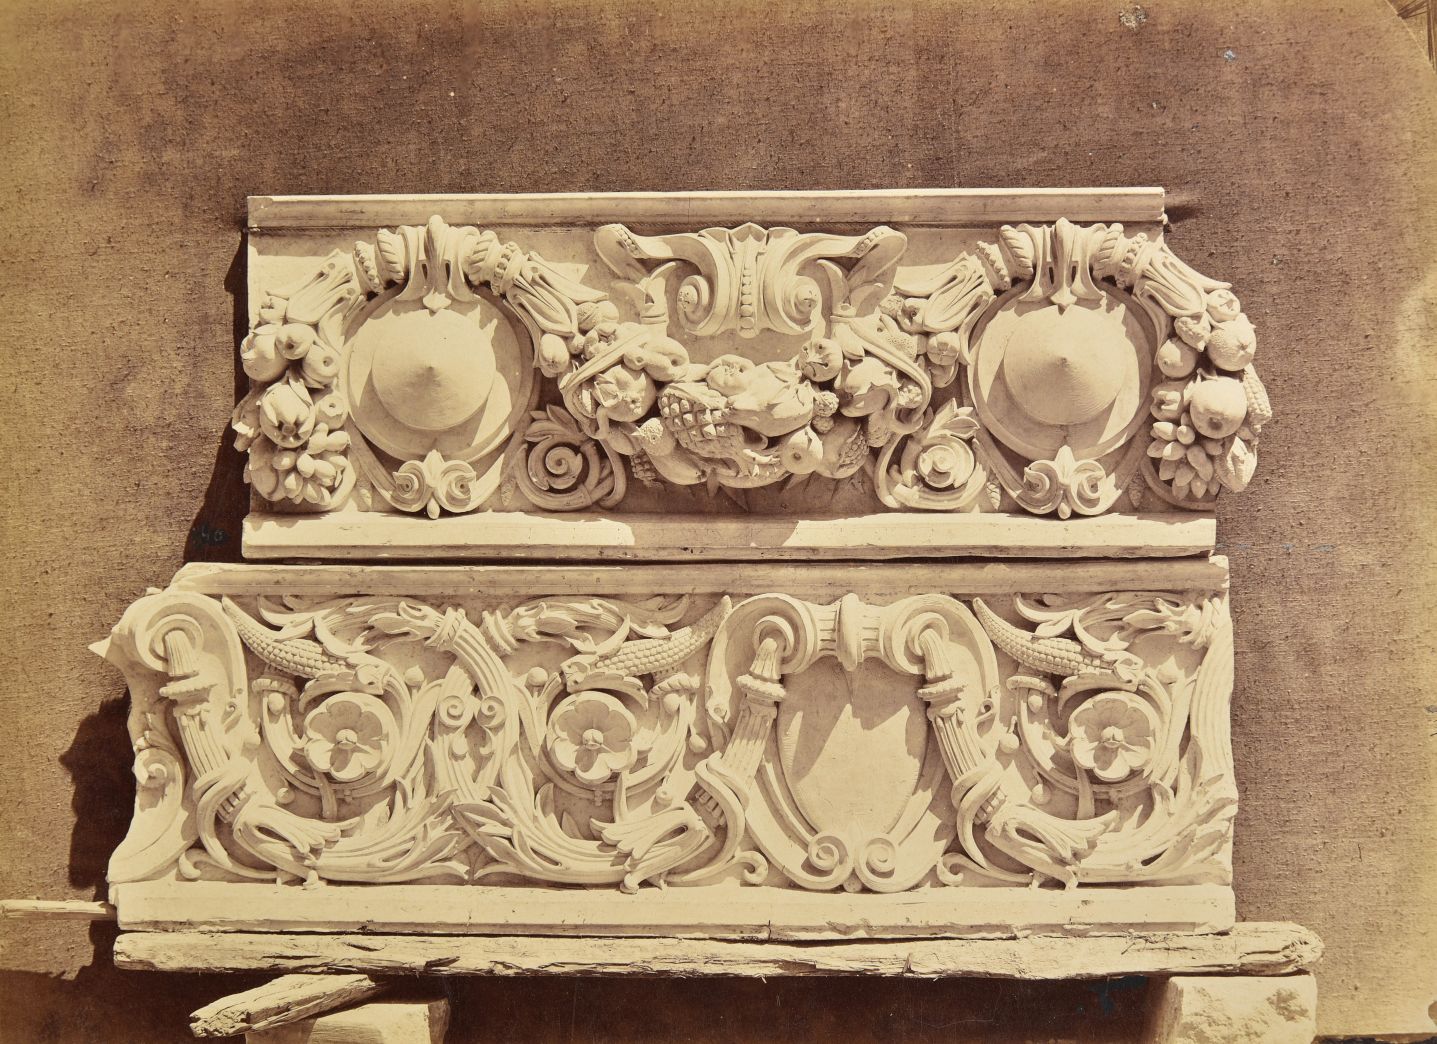 *Delmaet & Durandelle (fl. 1860-1870). A group of five photographs of ornamental stonework for the